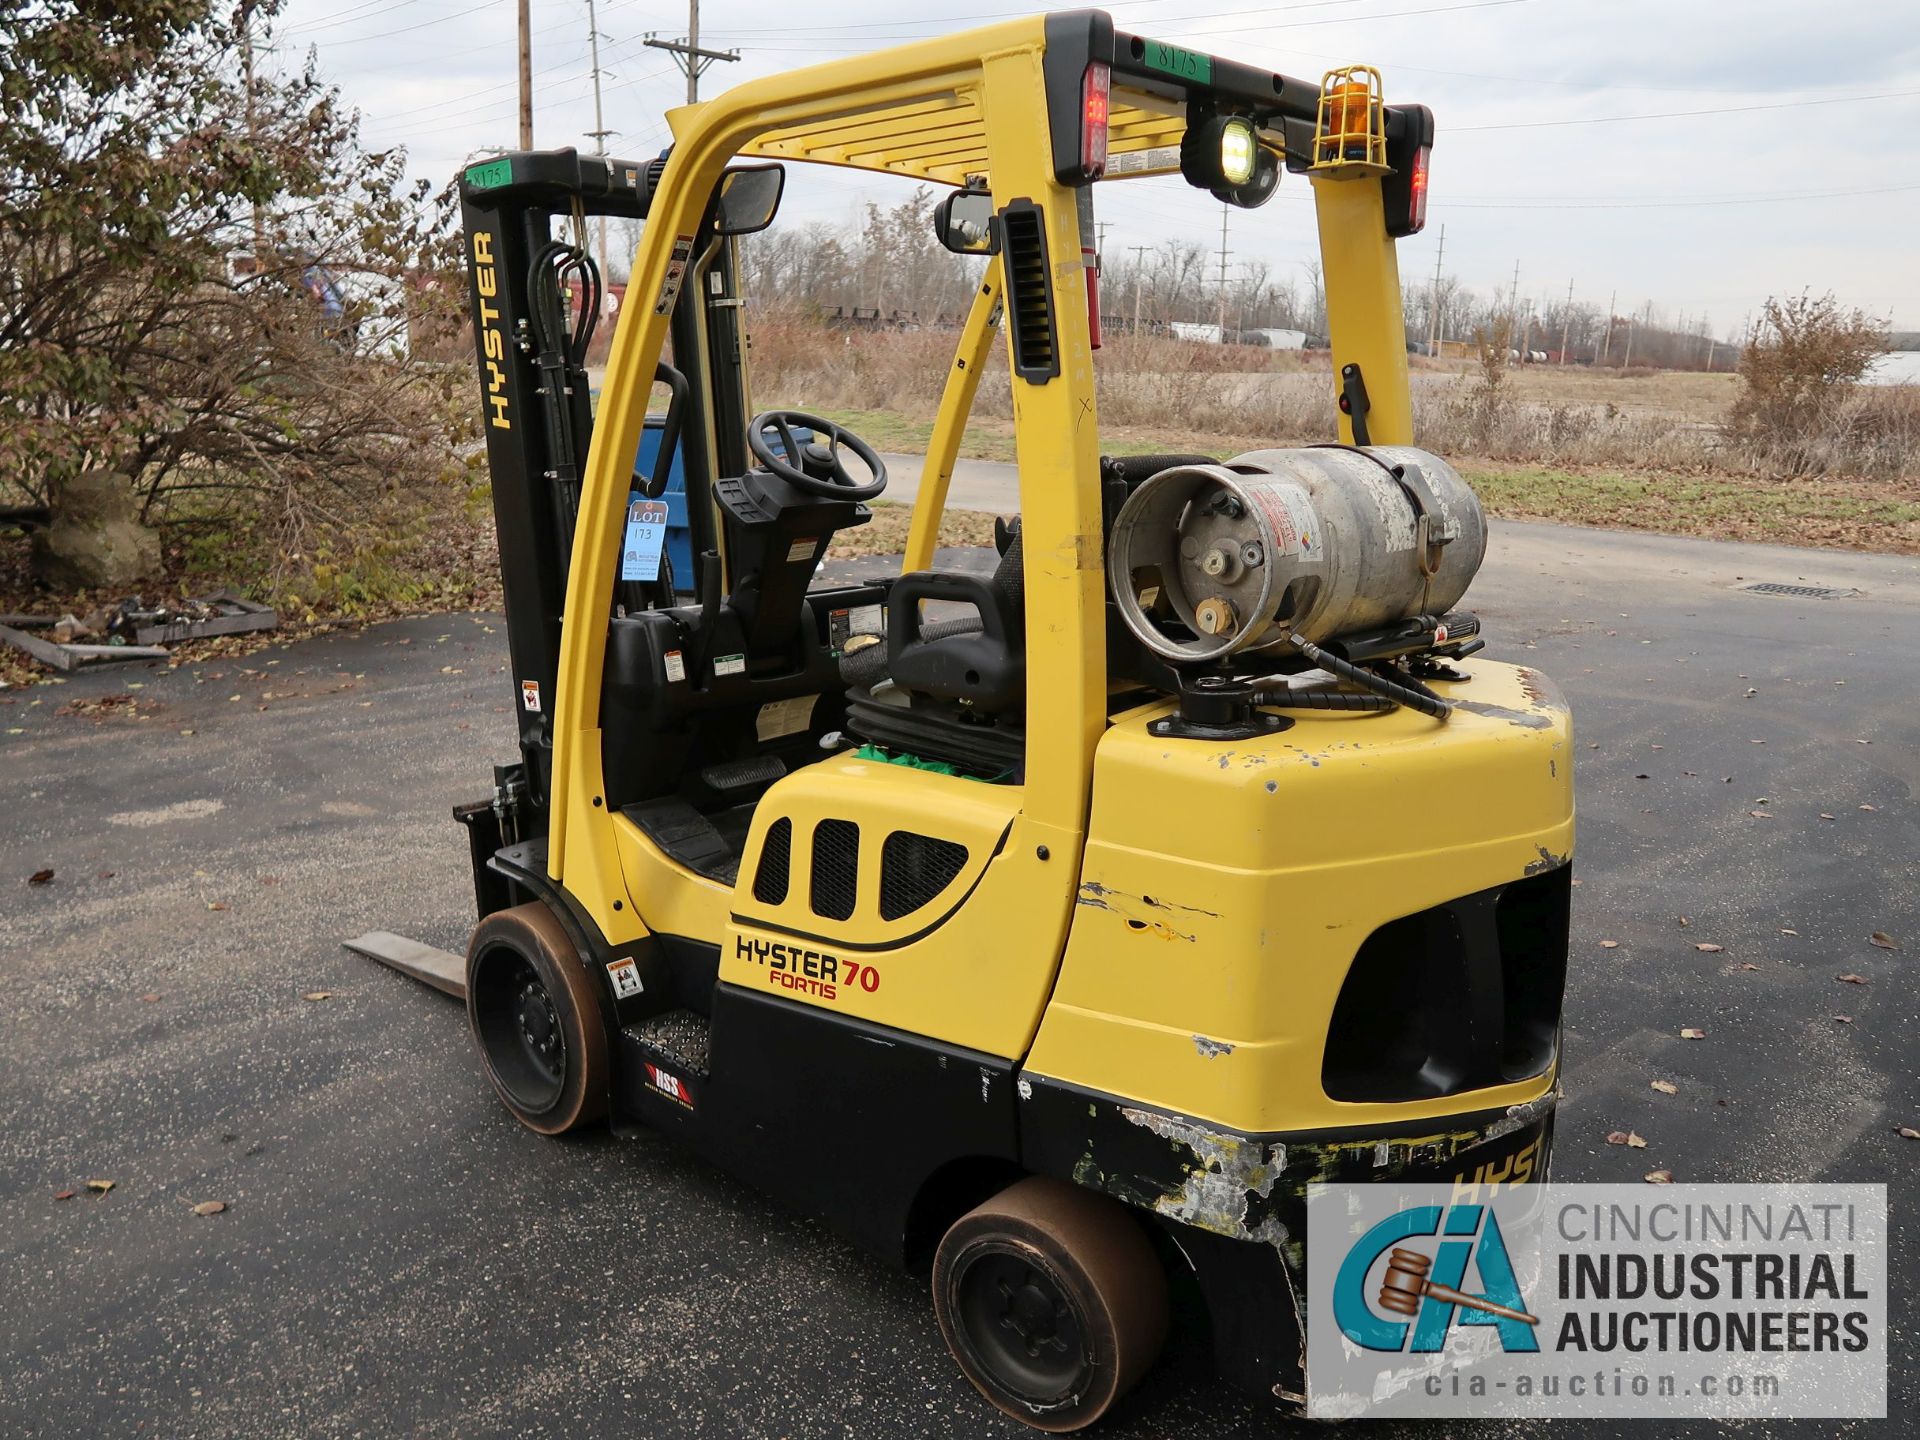 7,000 LB HYSTER MODEL S70 FT LP GAS FORKLIFT; S/N G187V02112M, 80" MAST HEIGHT, 122" MAX LIFT - Image 7 of 11